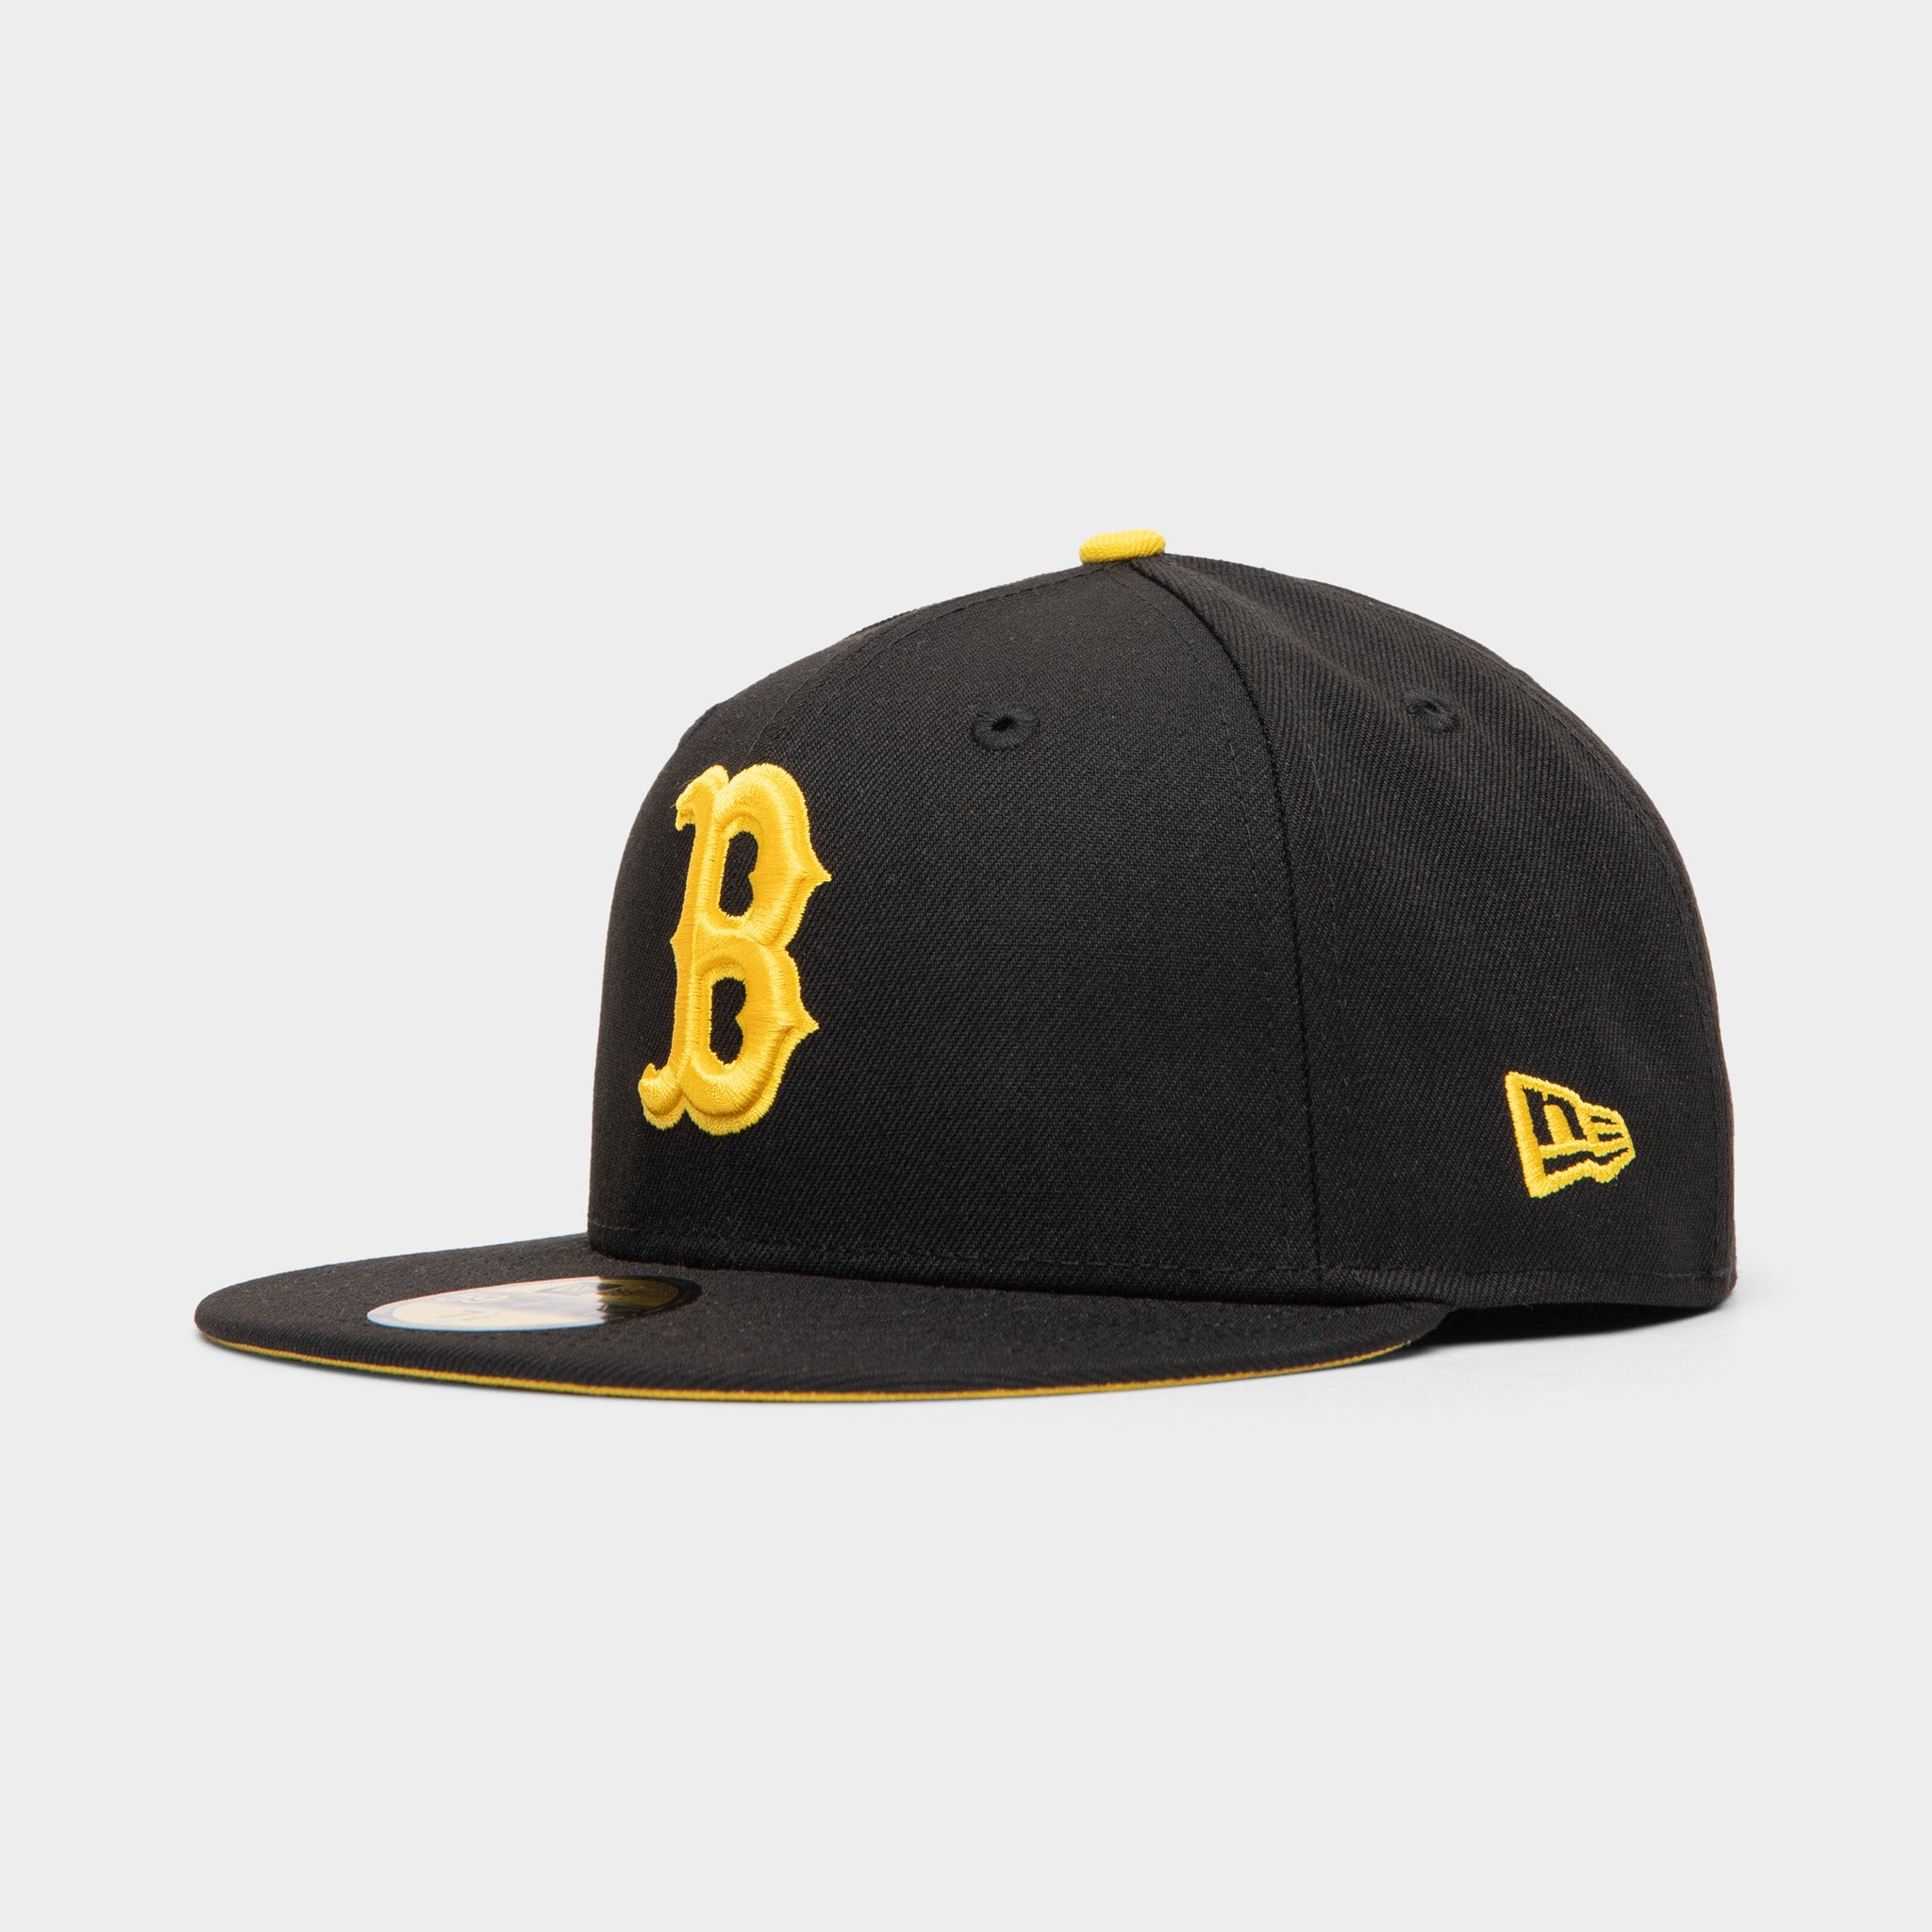 New Era 59FIFTY Boston Red Sox Fitted Cap Black / Cyber Yellow